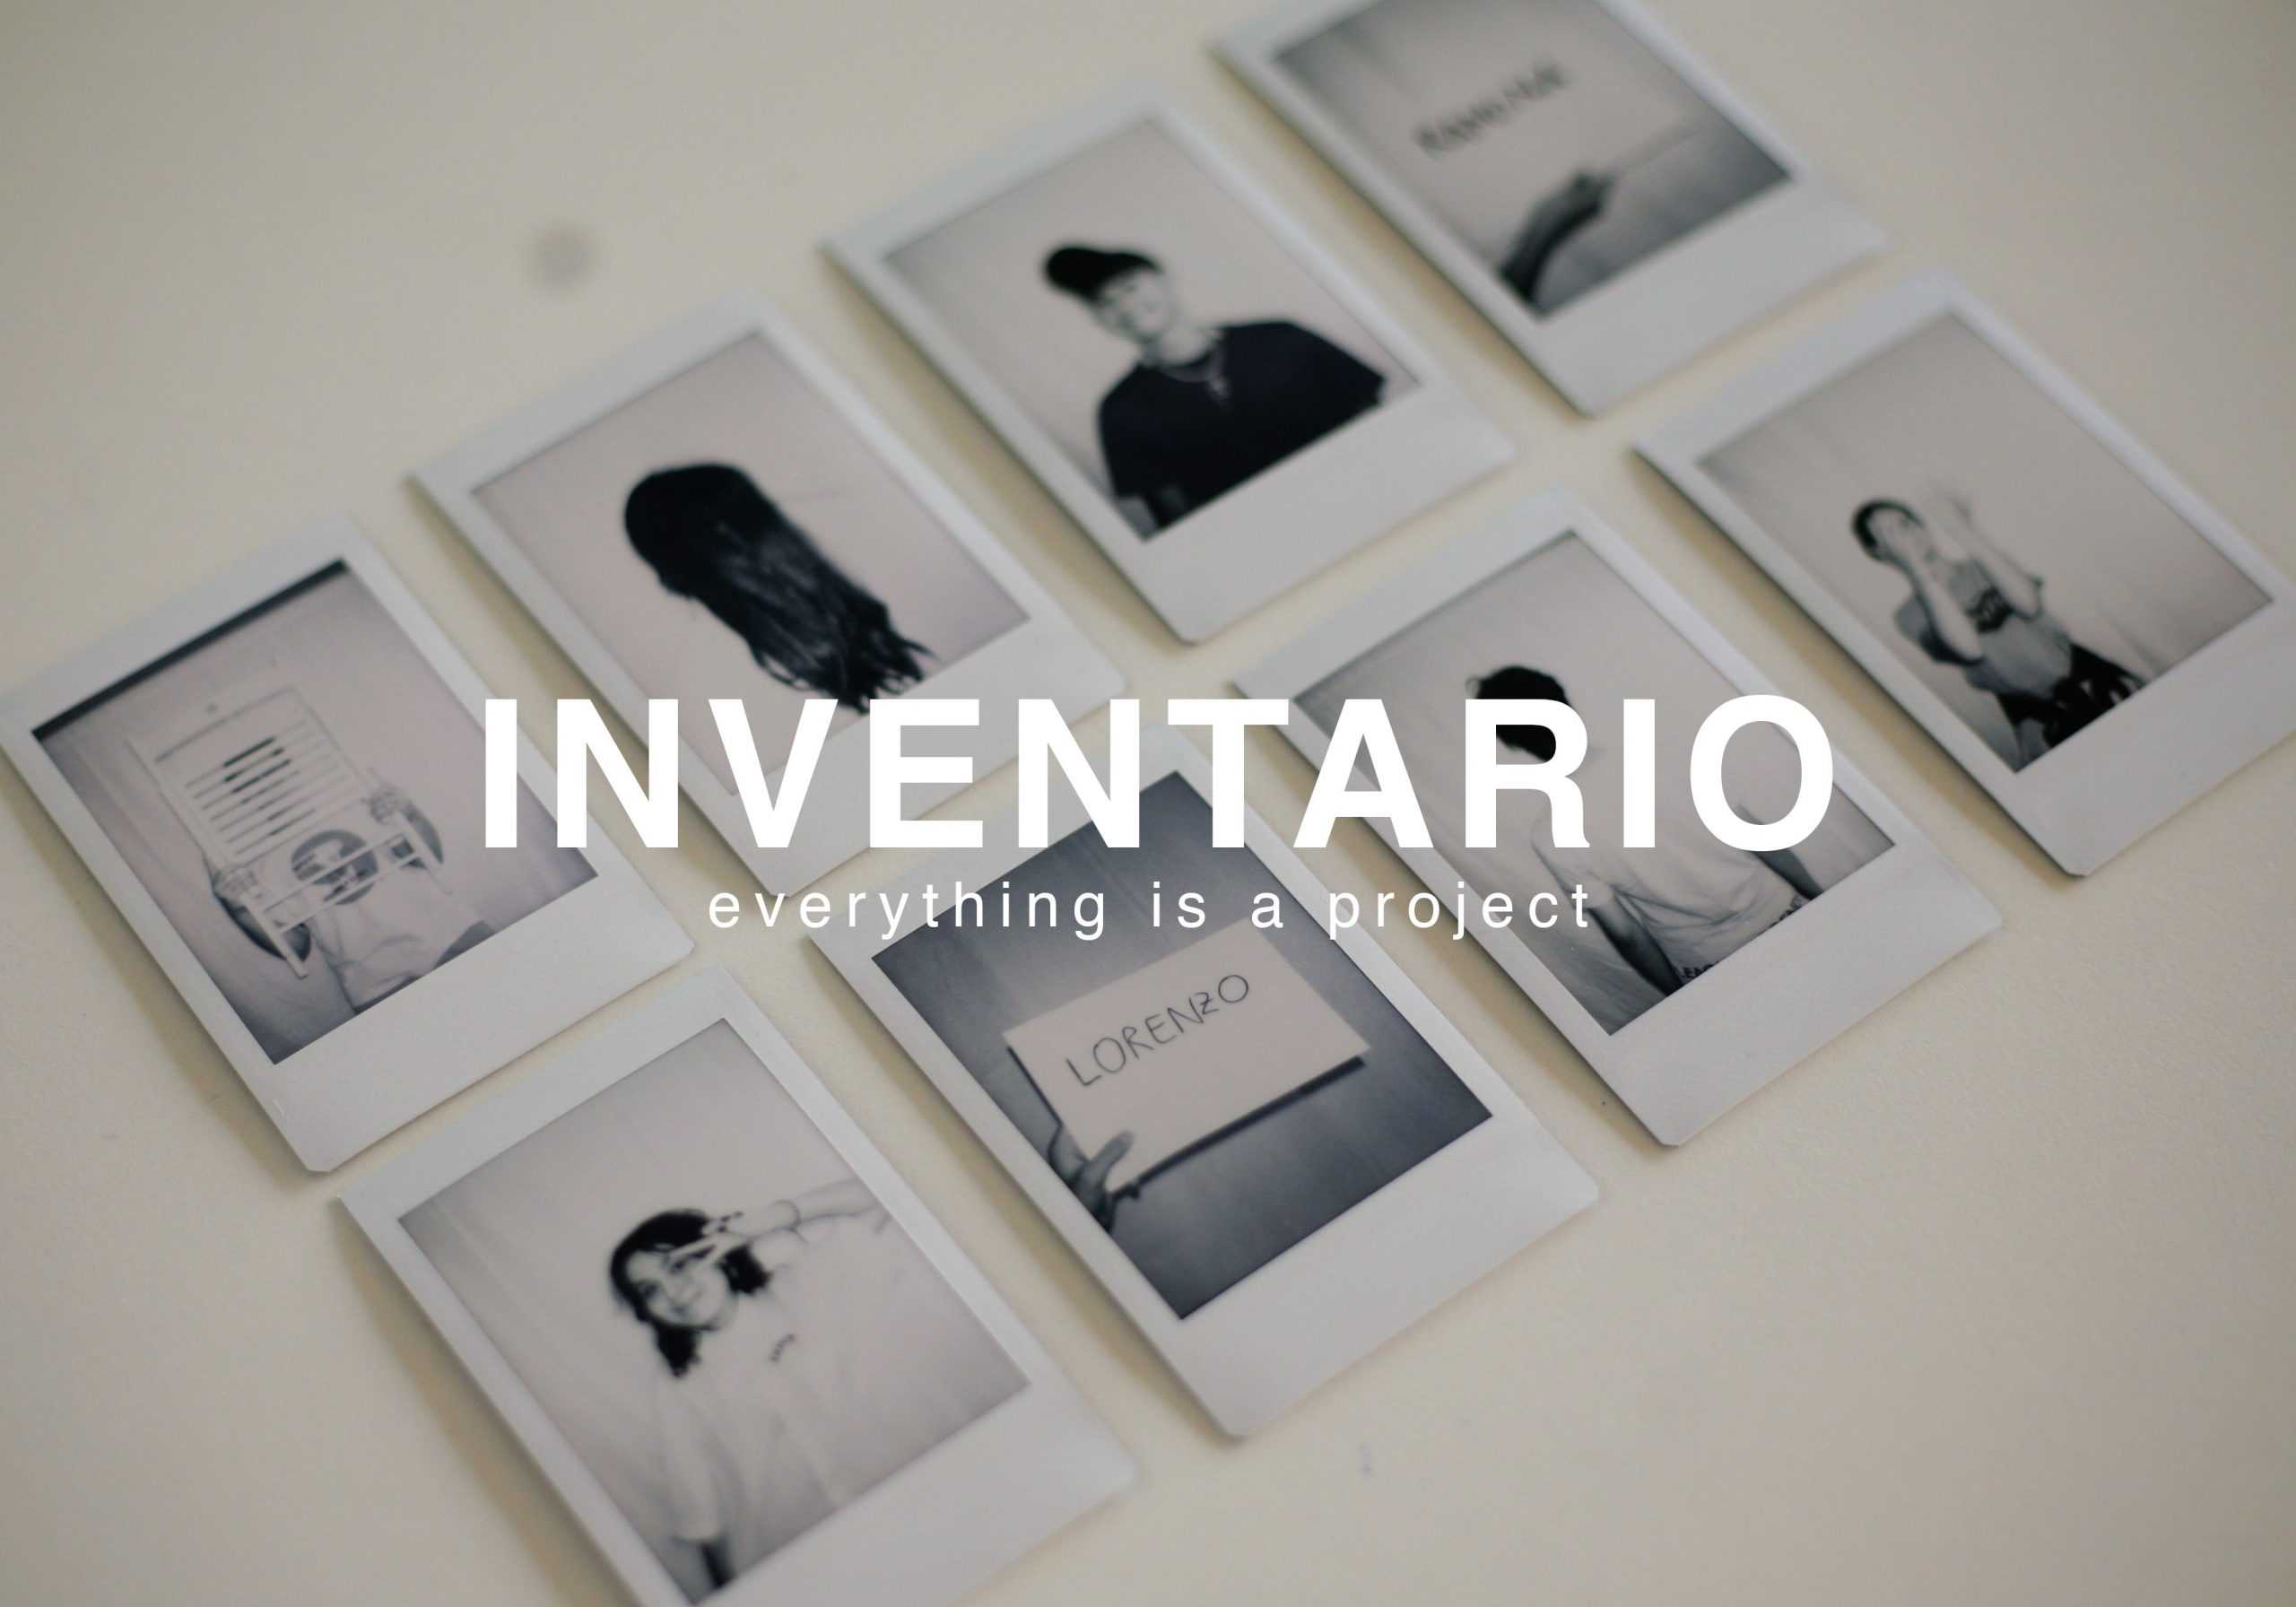 Inventario – Everything is a project